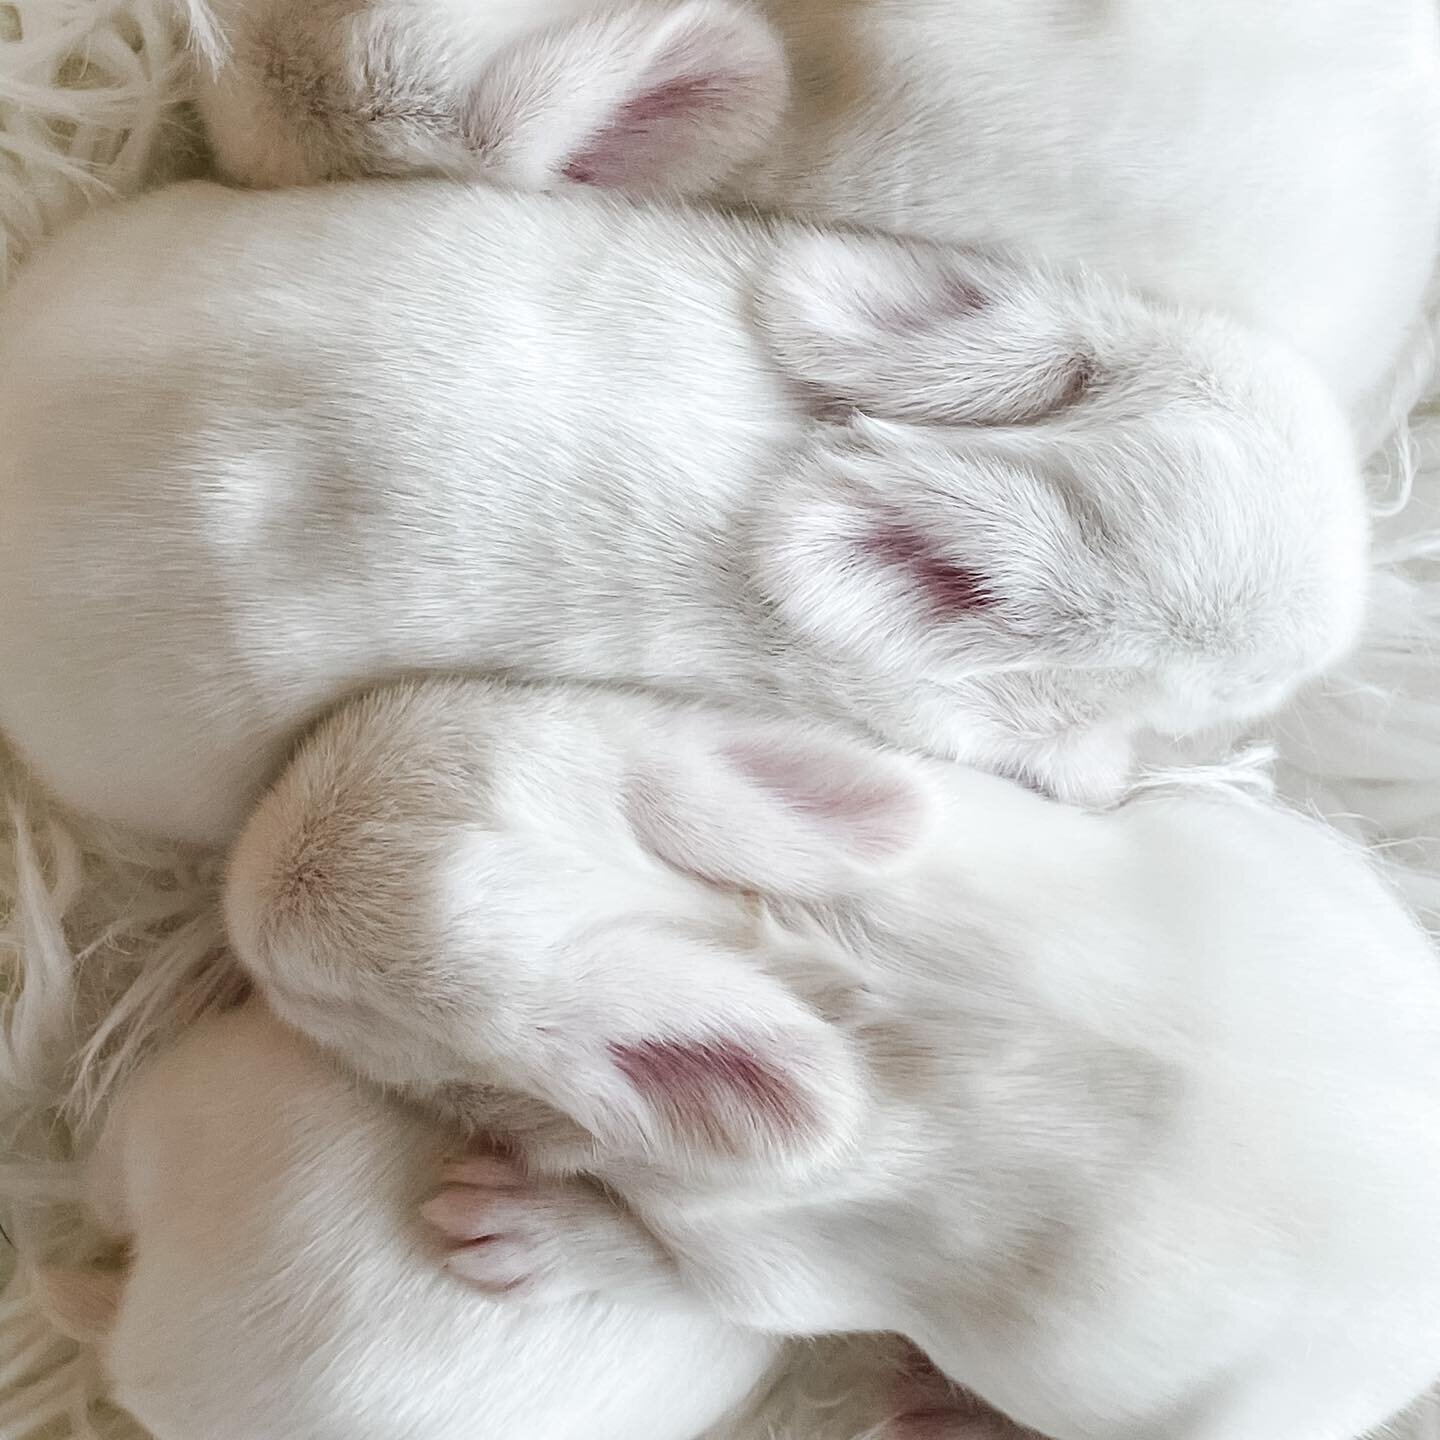 Looks like a great day for a snuggle!  The baby buns are growing up so fast.  Just look at those tiny ears. 🐰🤍🐰 #babybunnies #cute #babyanimals #hollandlop#rabbitsofinstagram #rabbit #floppyears #farmgirl #hobbyfarm